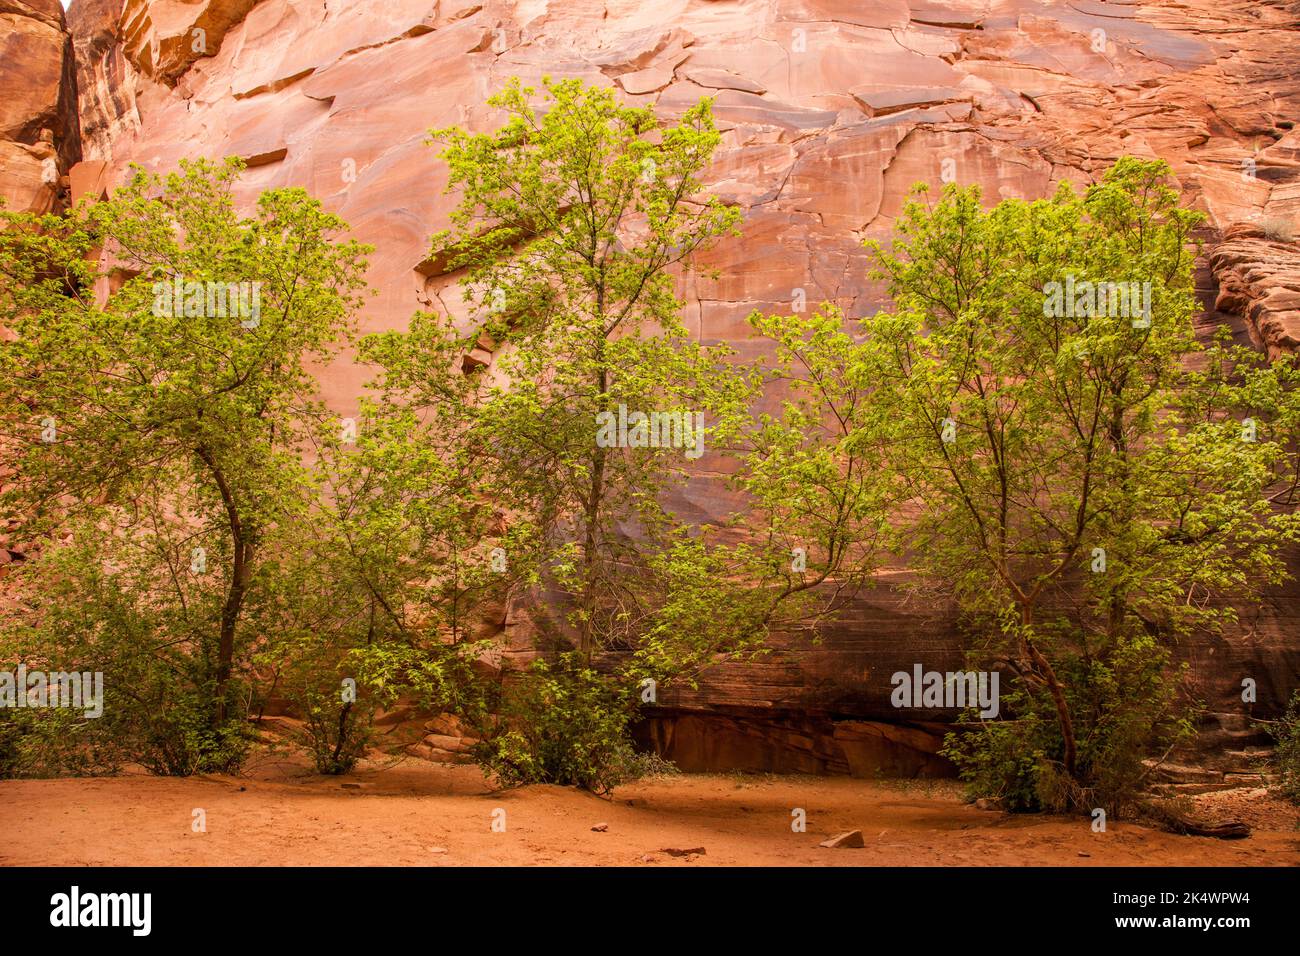 Boxelder trees in front of a sandstone wall in the Devil's Kitchen area of the Needles District, Canyonlands National Park, Utah. Stock Photo